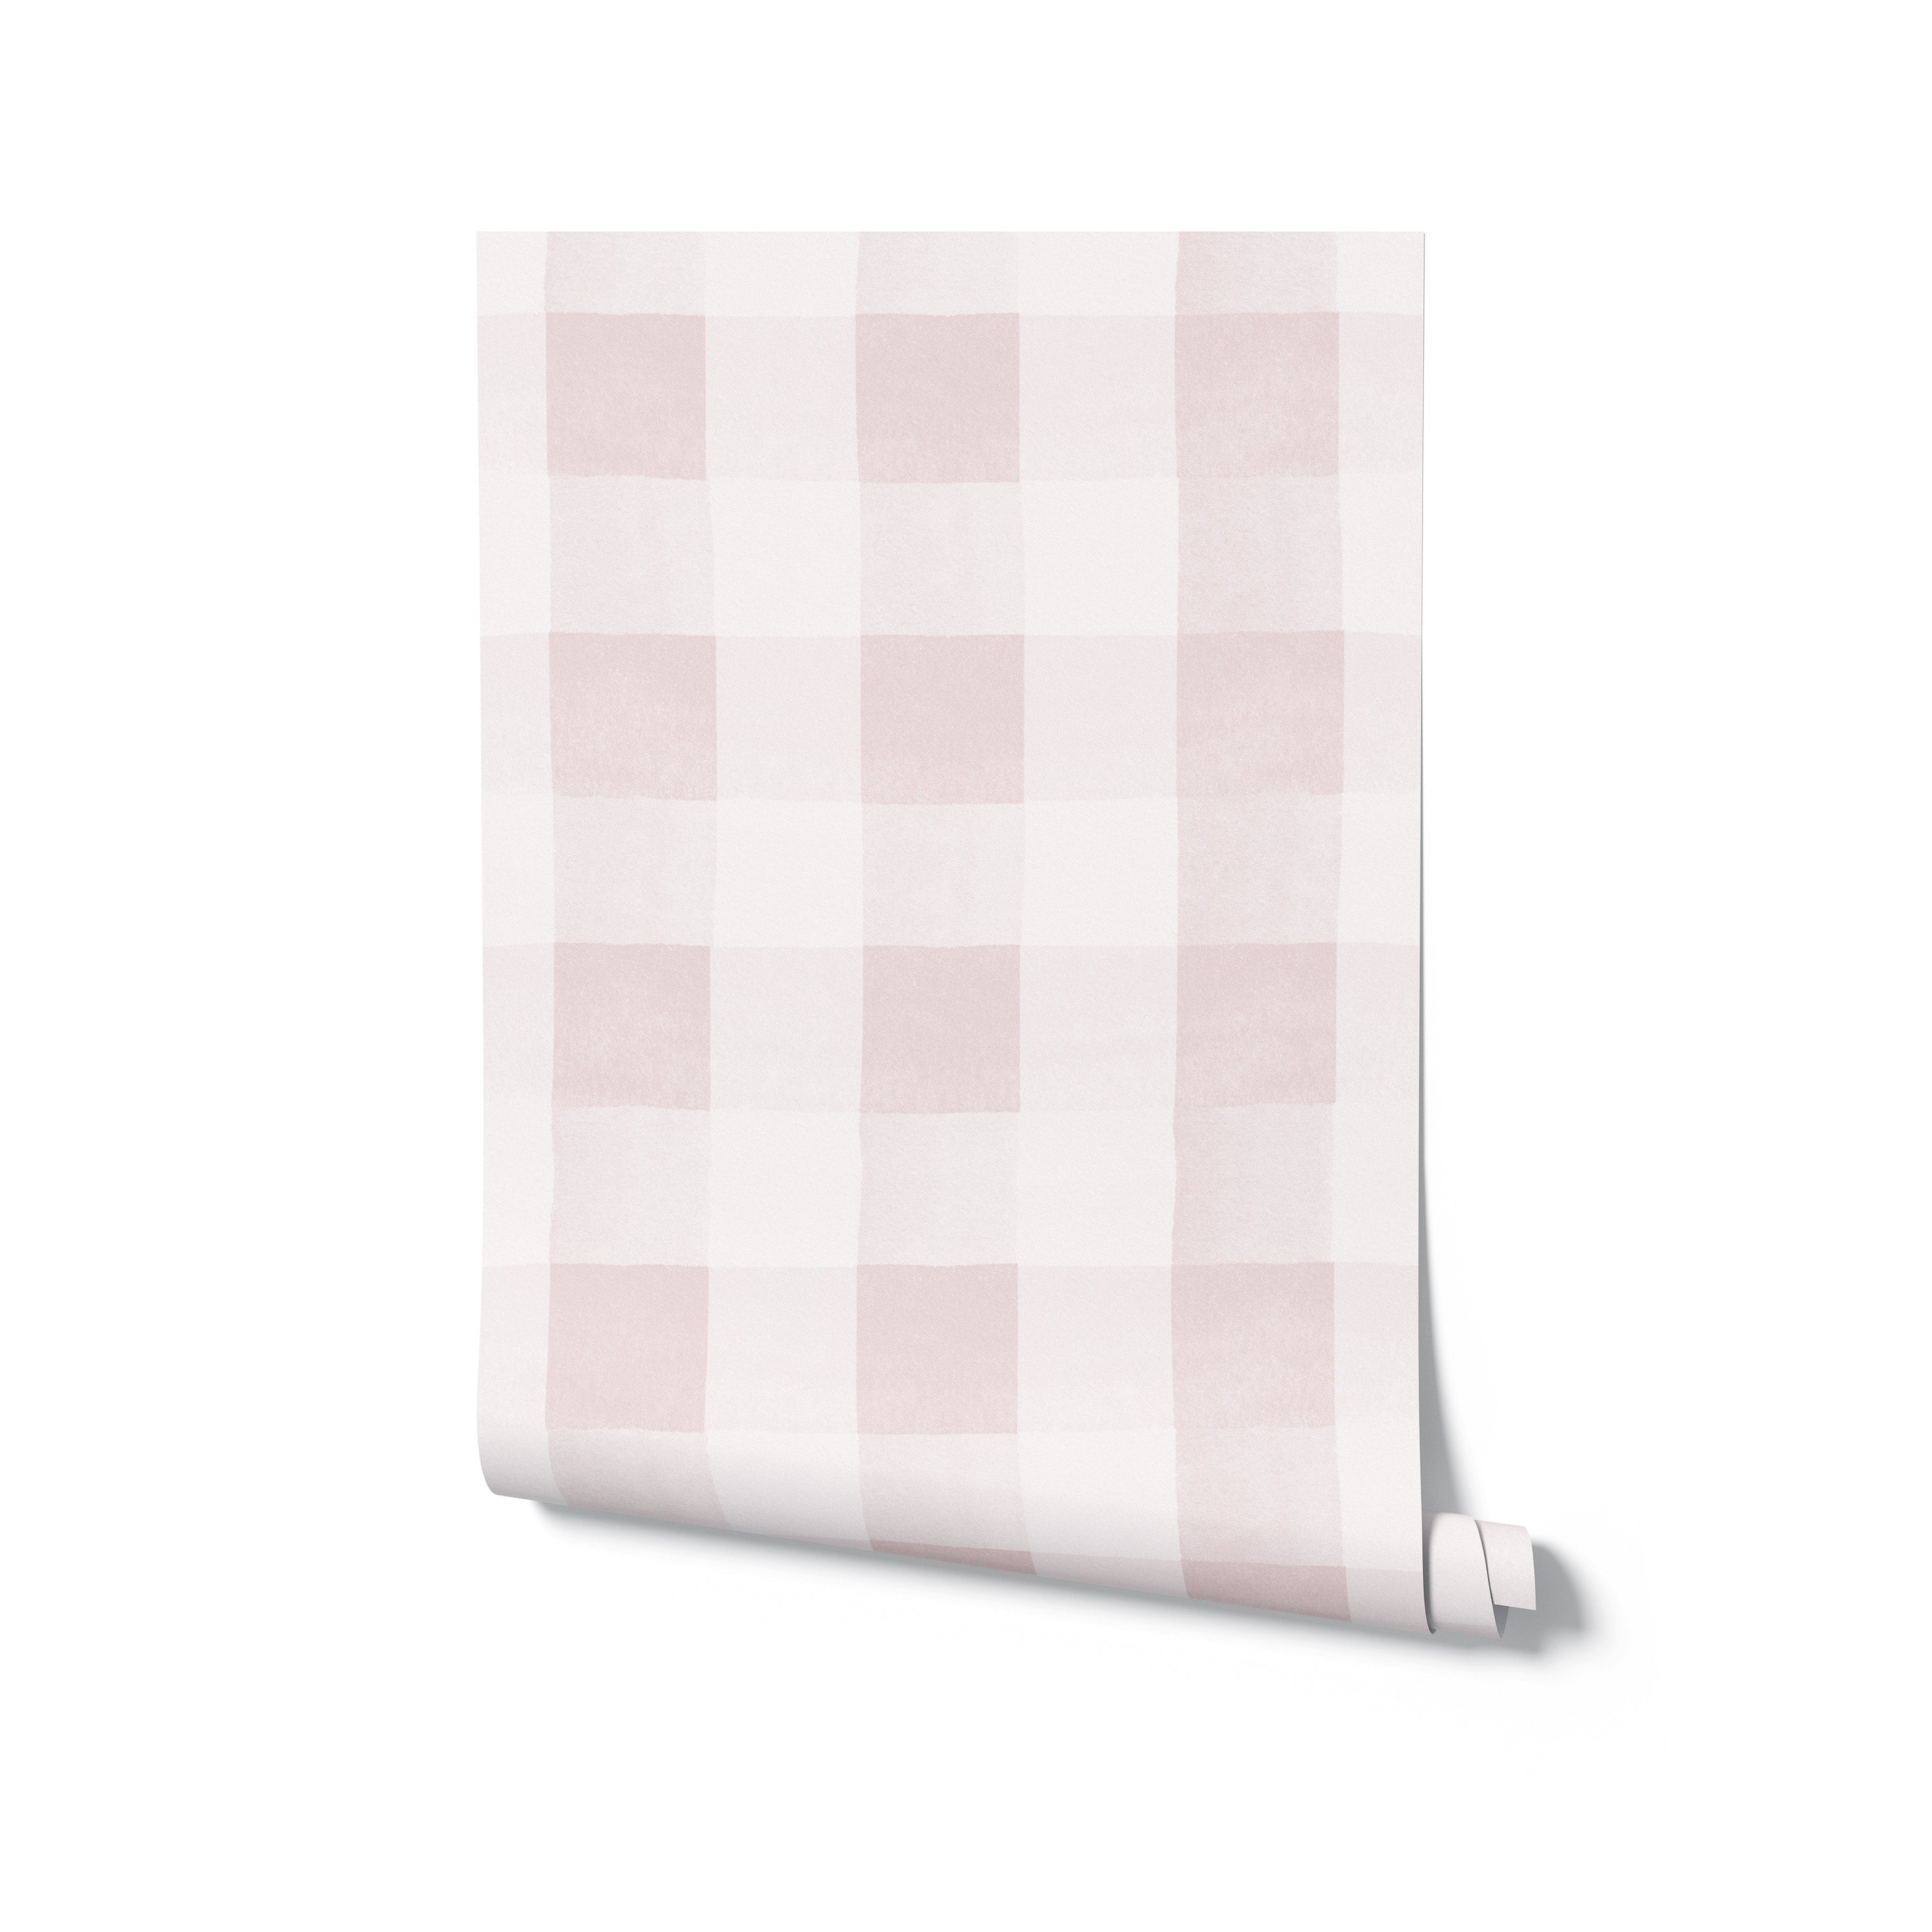 A roll of Camille Wallpaper - Nude partially unrolled to reveal its elegant checkered pattern in pale pink and white. This image highlights the wallpaper’s potential to infuse any space with a sense of softness and tranquility, ideal for bedrooms and nurseries